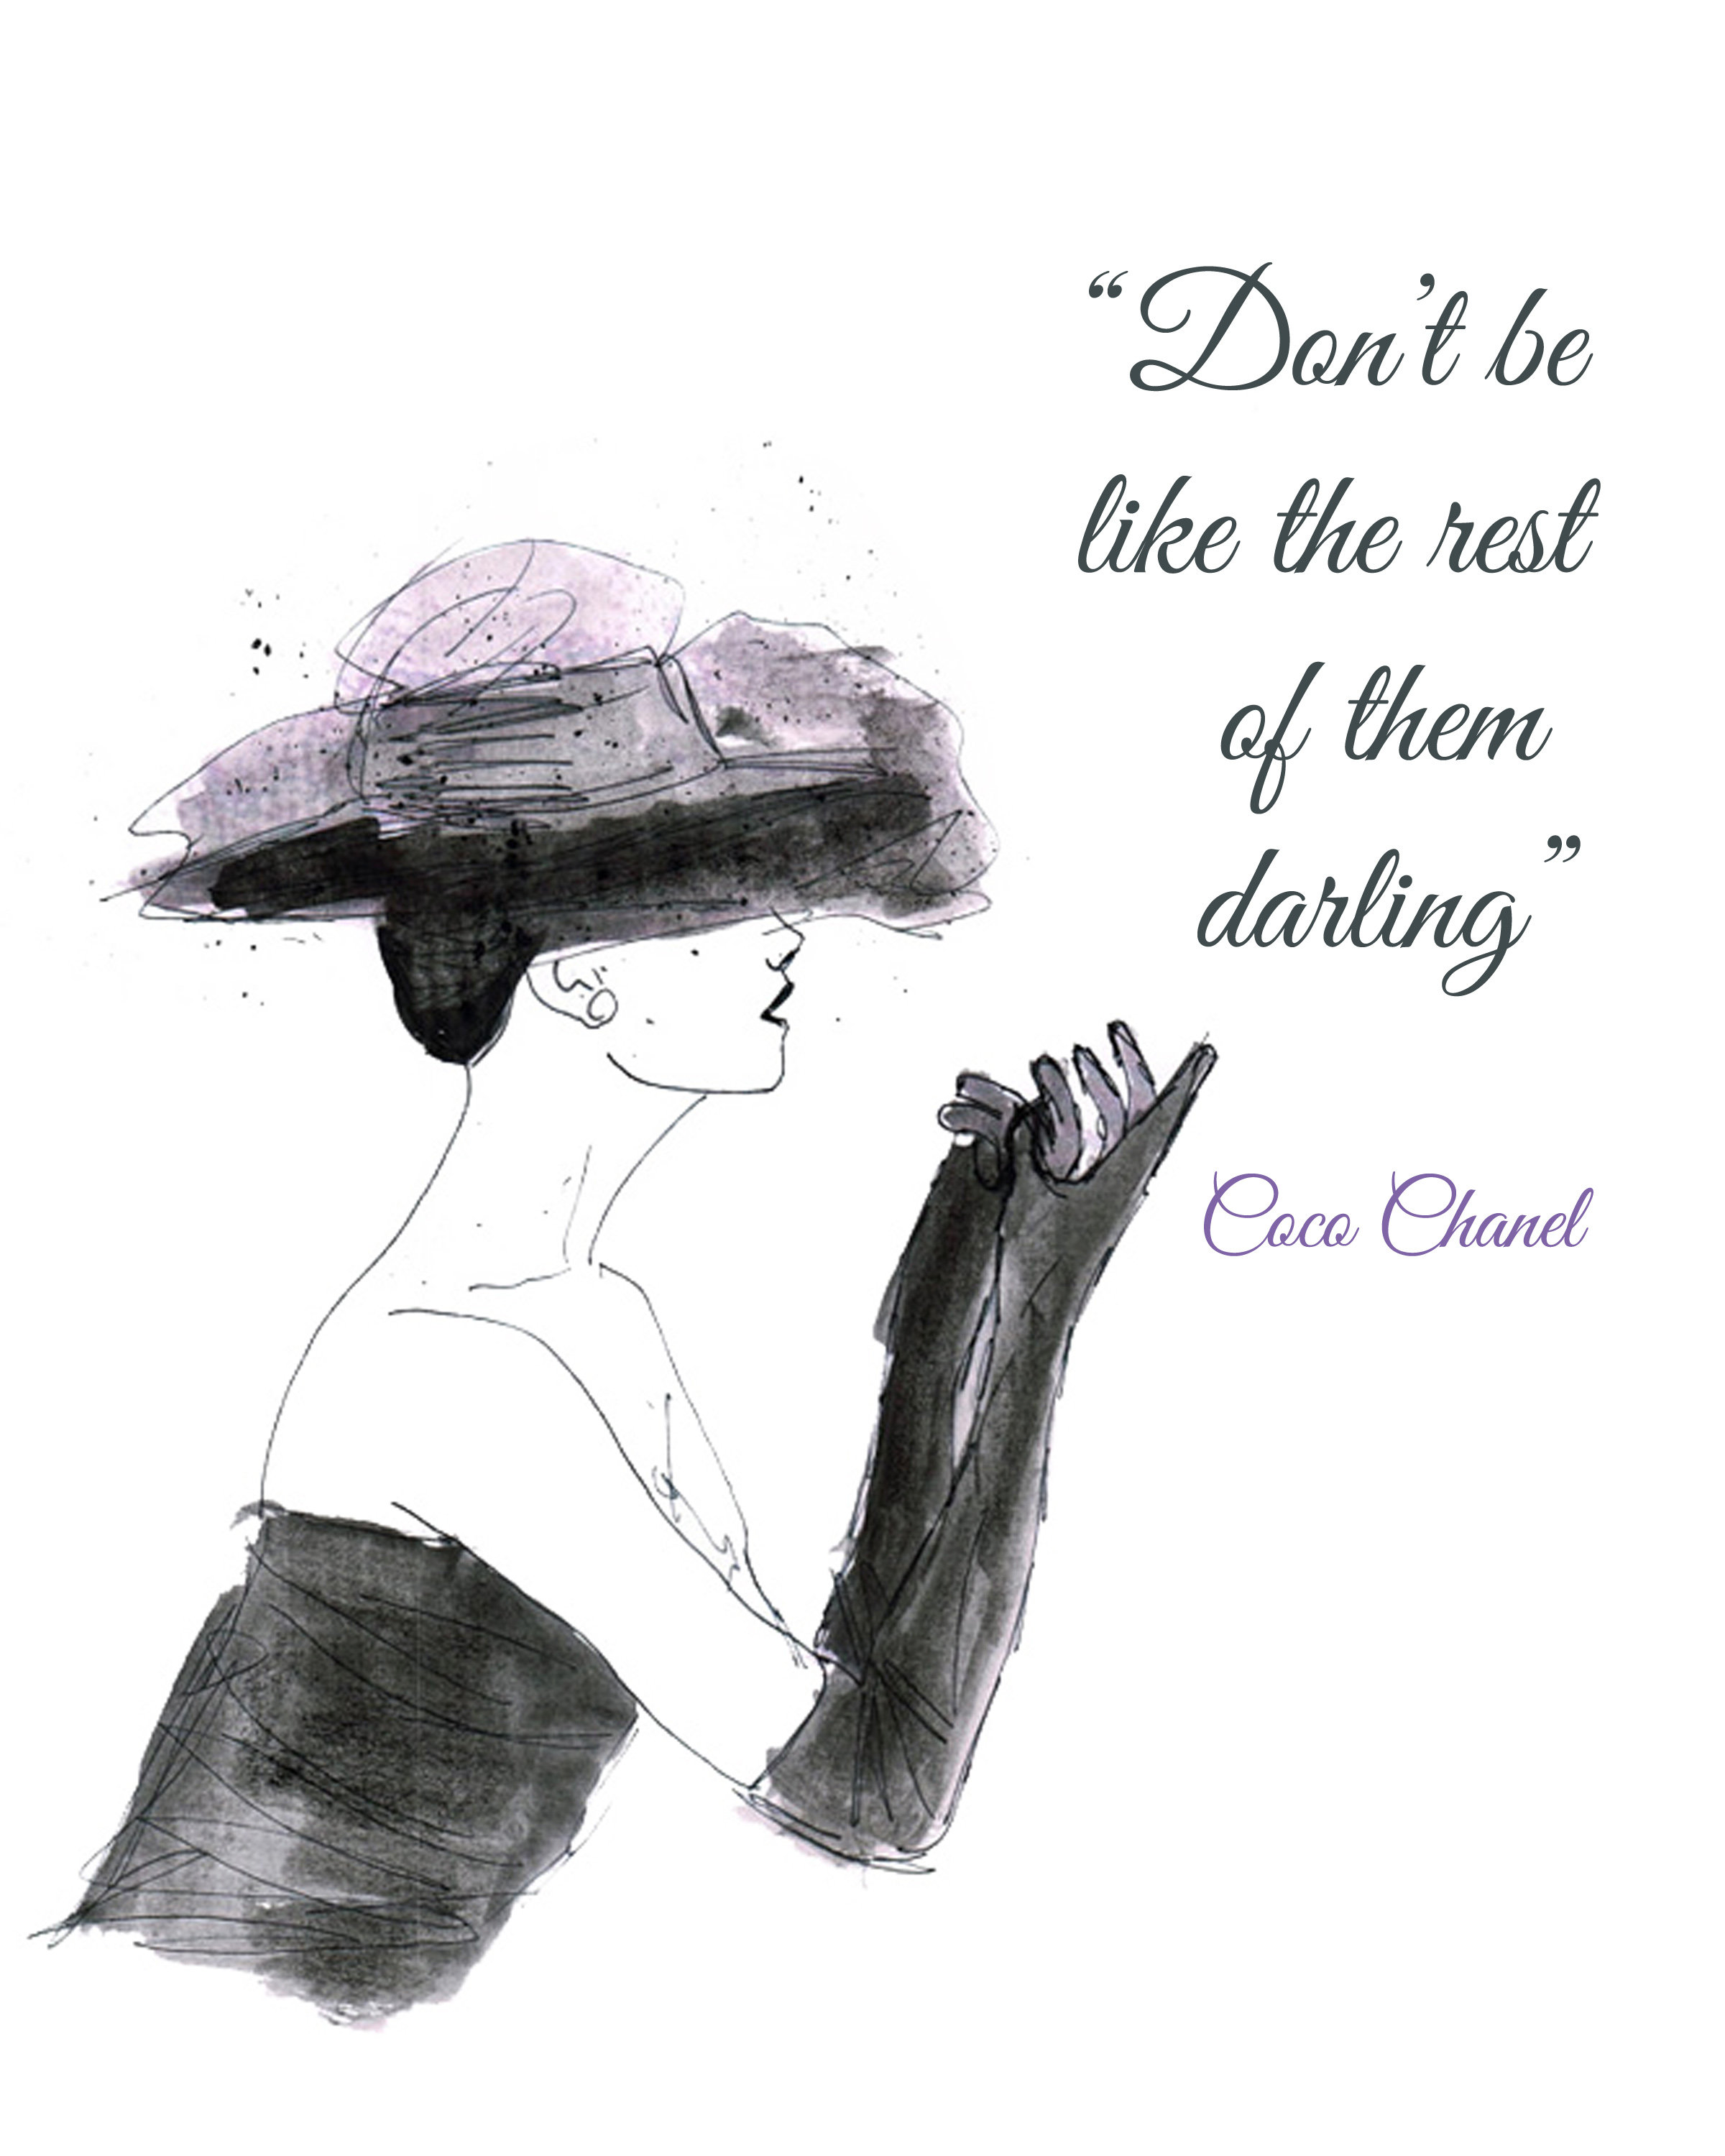 don't be like the rest of them darling, chanel quote print, girl power,  lipstick prints, chanel inspired, apartment decor, motivational